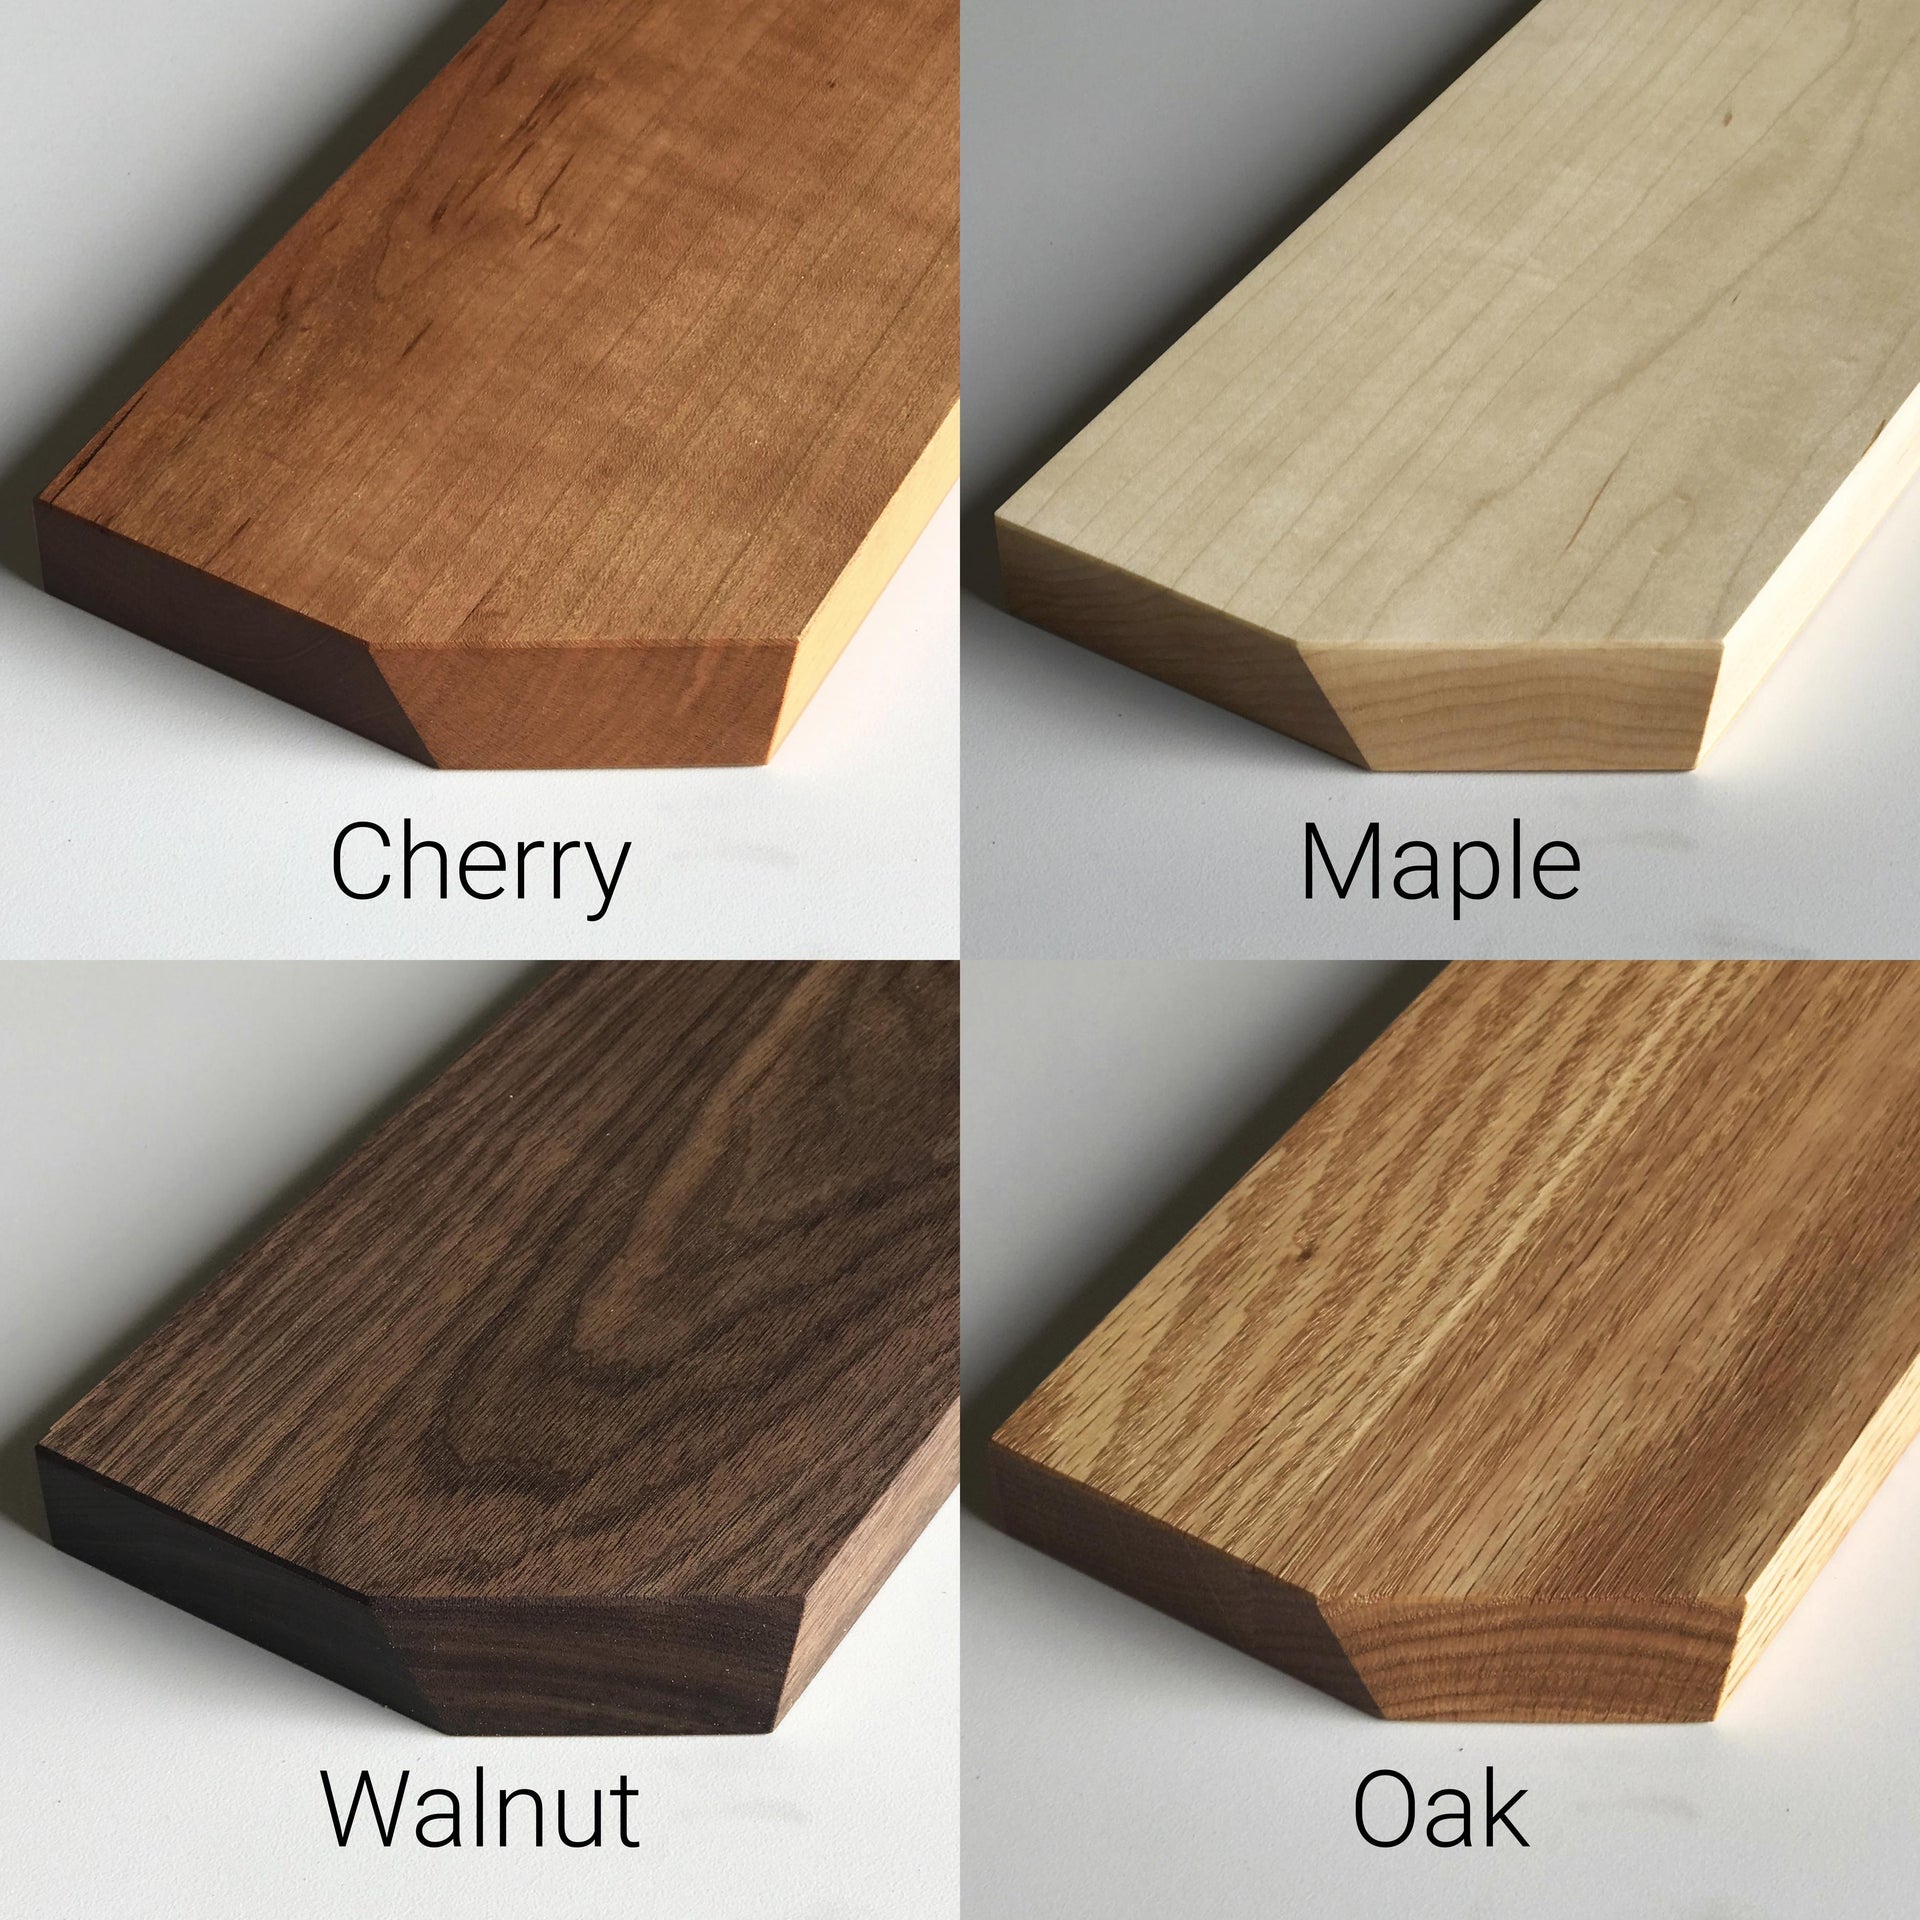 Samples of natural solid wood in cherry, walnut, oak, and maple